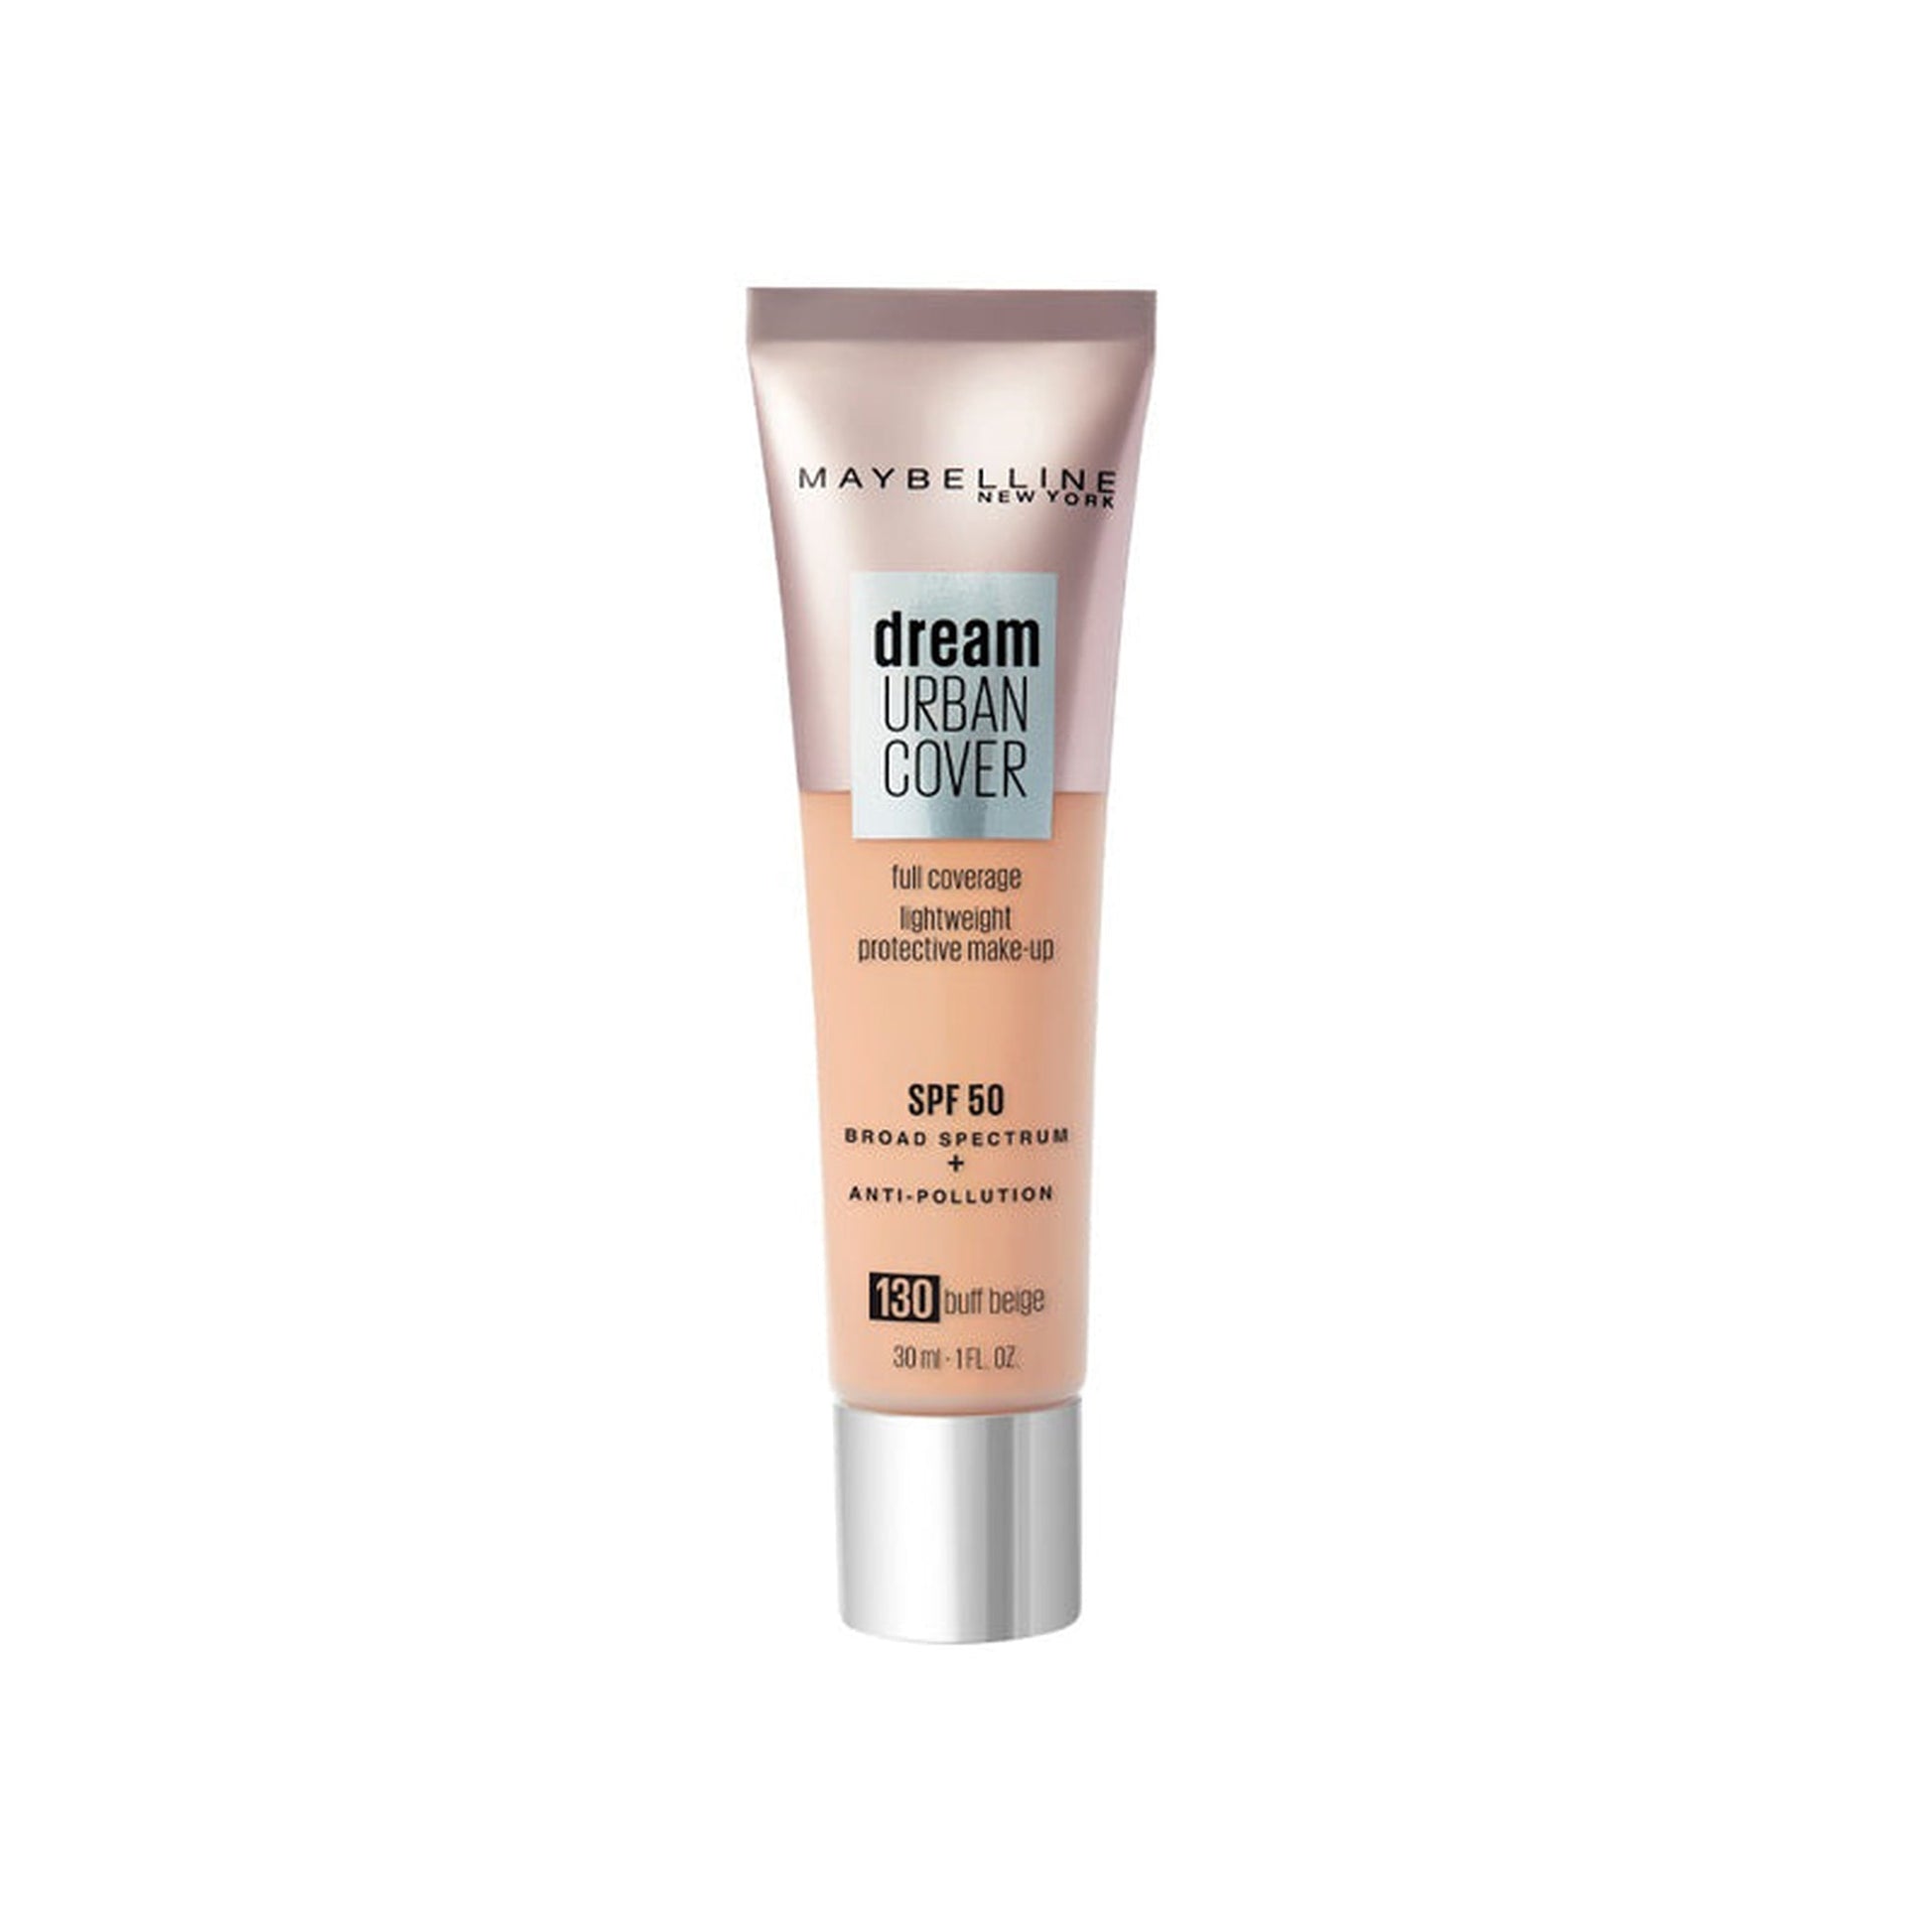 Maybeline Dream Urban Cover Foundation SPF50 - 130 Buff Beige-Maybelline-BeautyNmakeup.co.uk